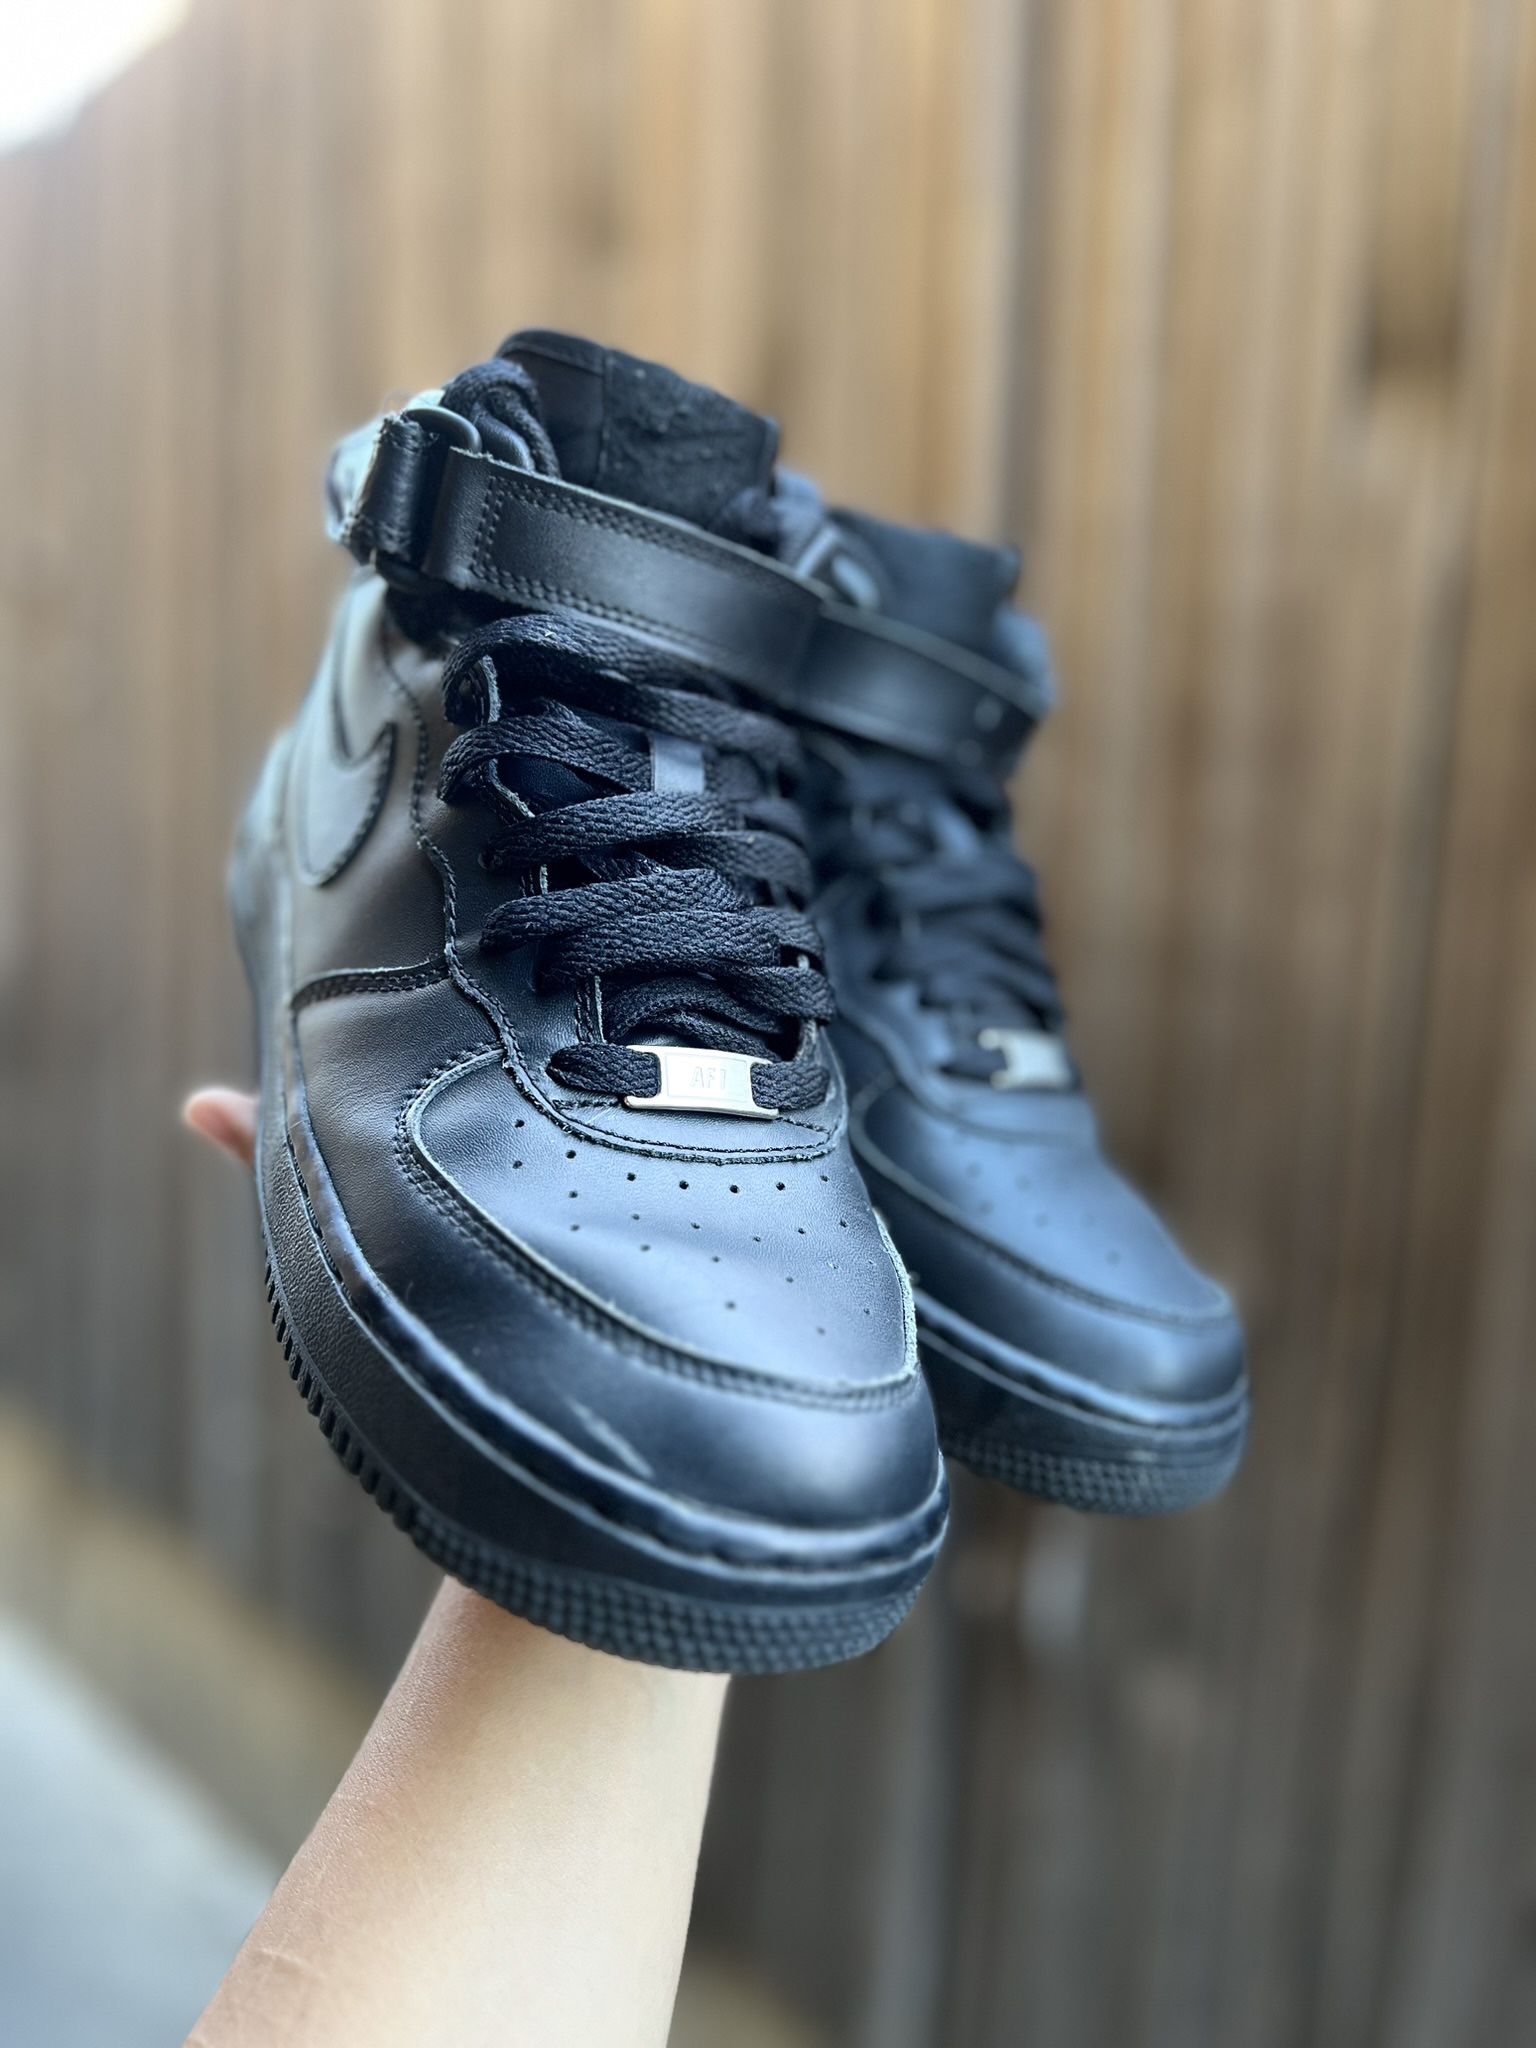 Nike Black Air Forces Shoes